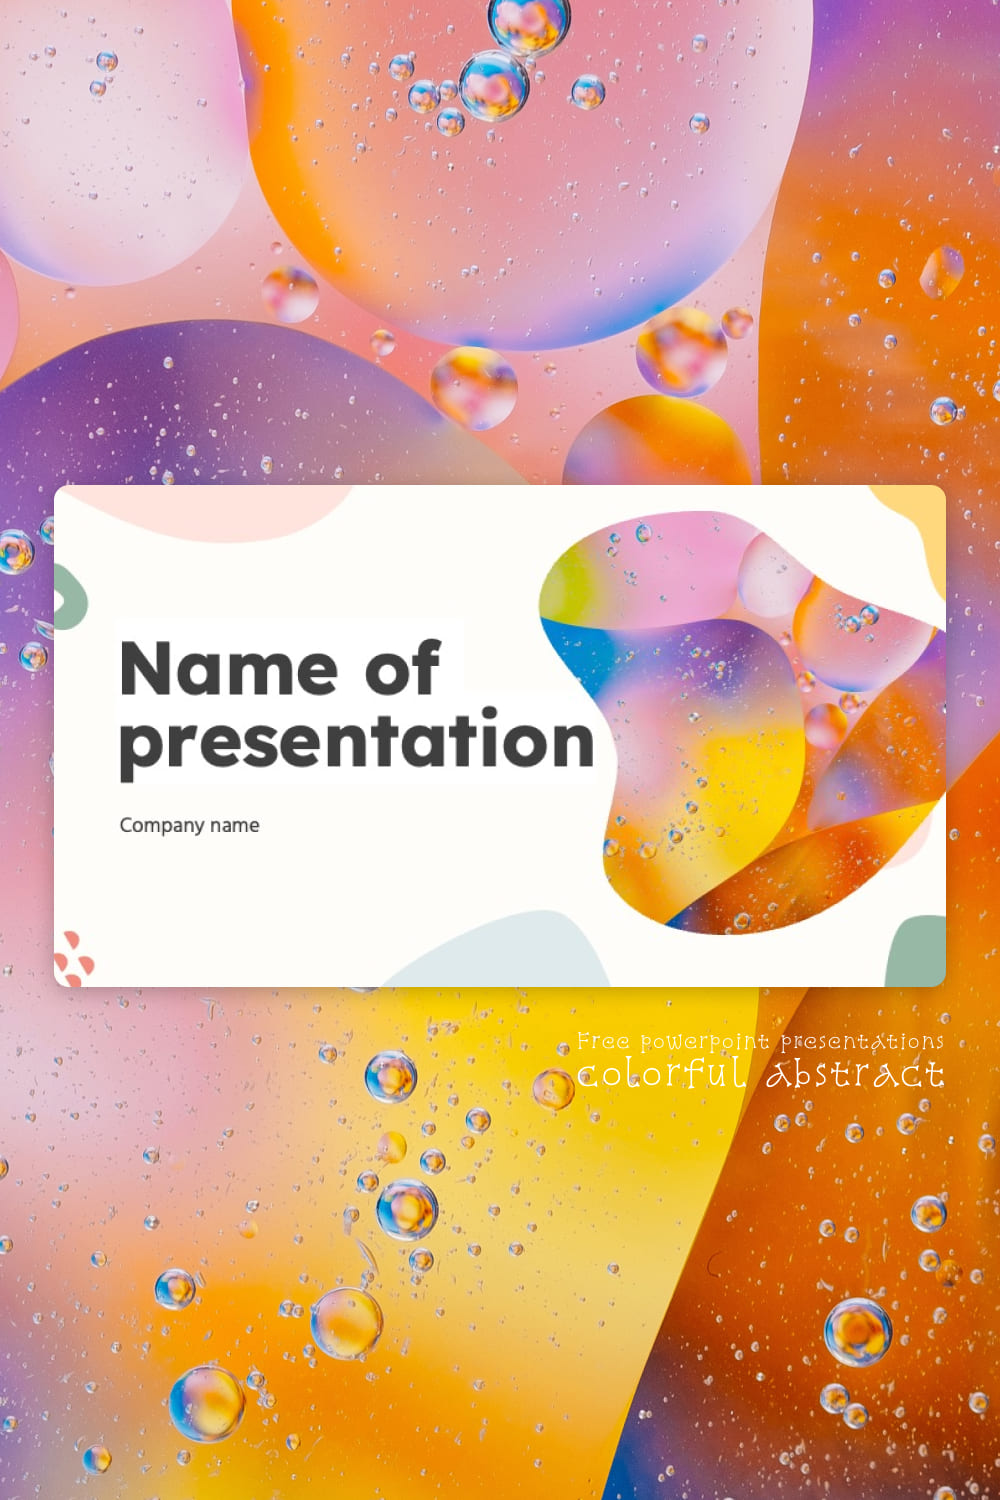 Free Powerpoint Presentations Colorful Abstract Pinterest.